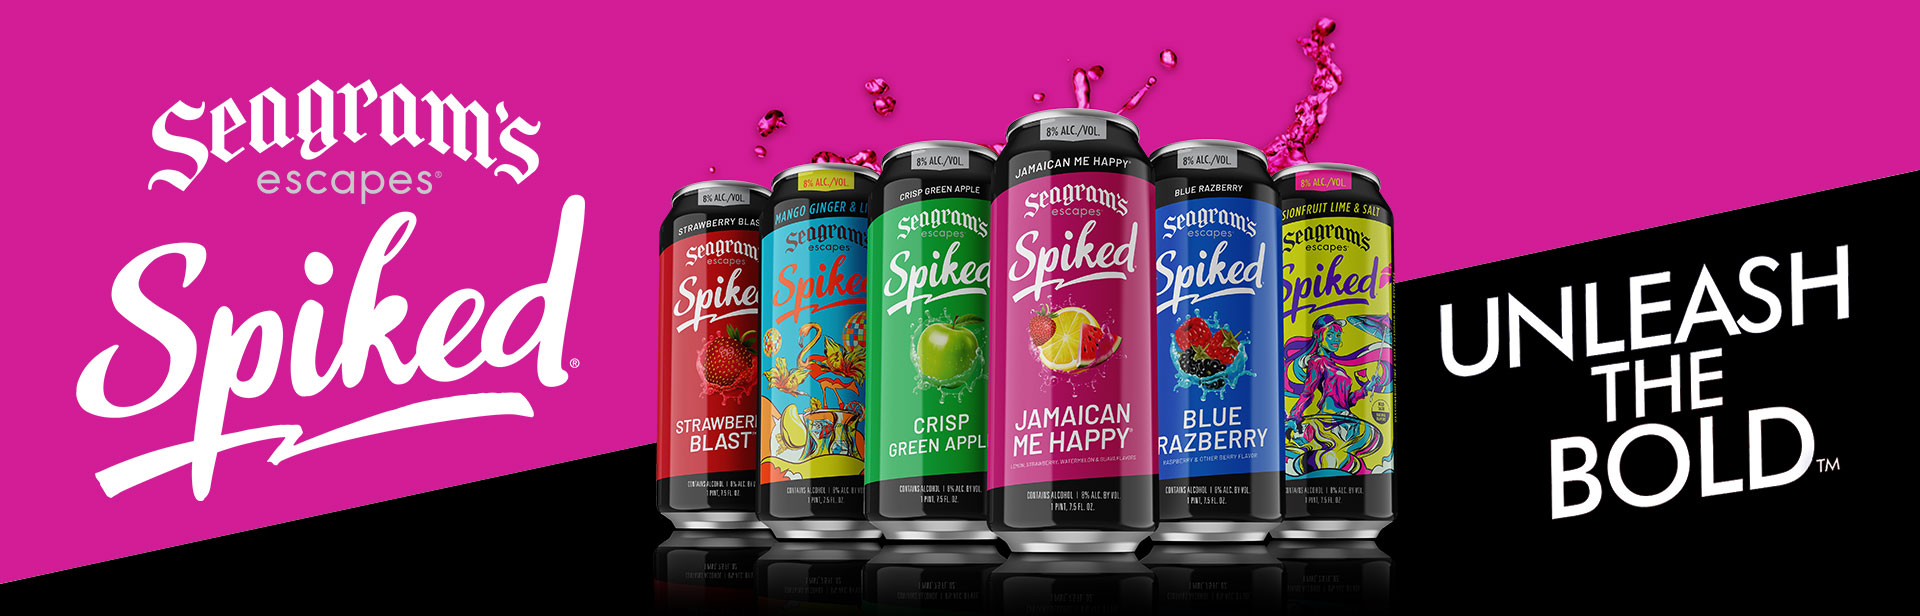 Image of six cans of Seagrams Escapes Spiked, in all six flavors, including New Spiked Passionfruit Lime & Salt and Spiked Mango Ginger & Lime! Text reads: Seagrams Escapes Spiked - Unleash the Bold!